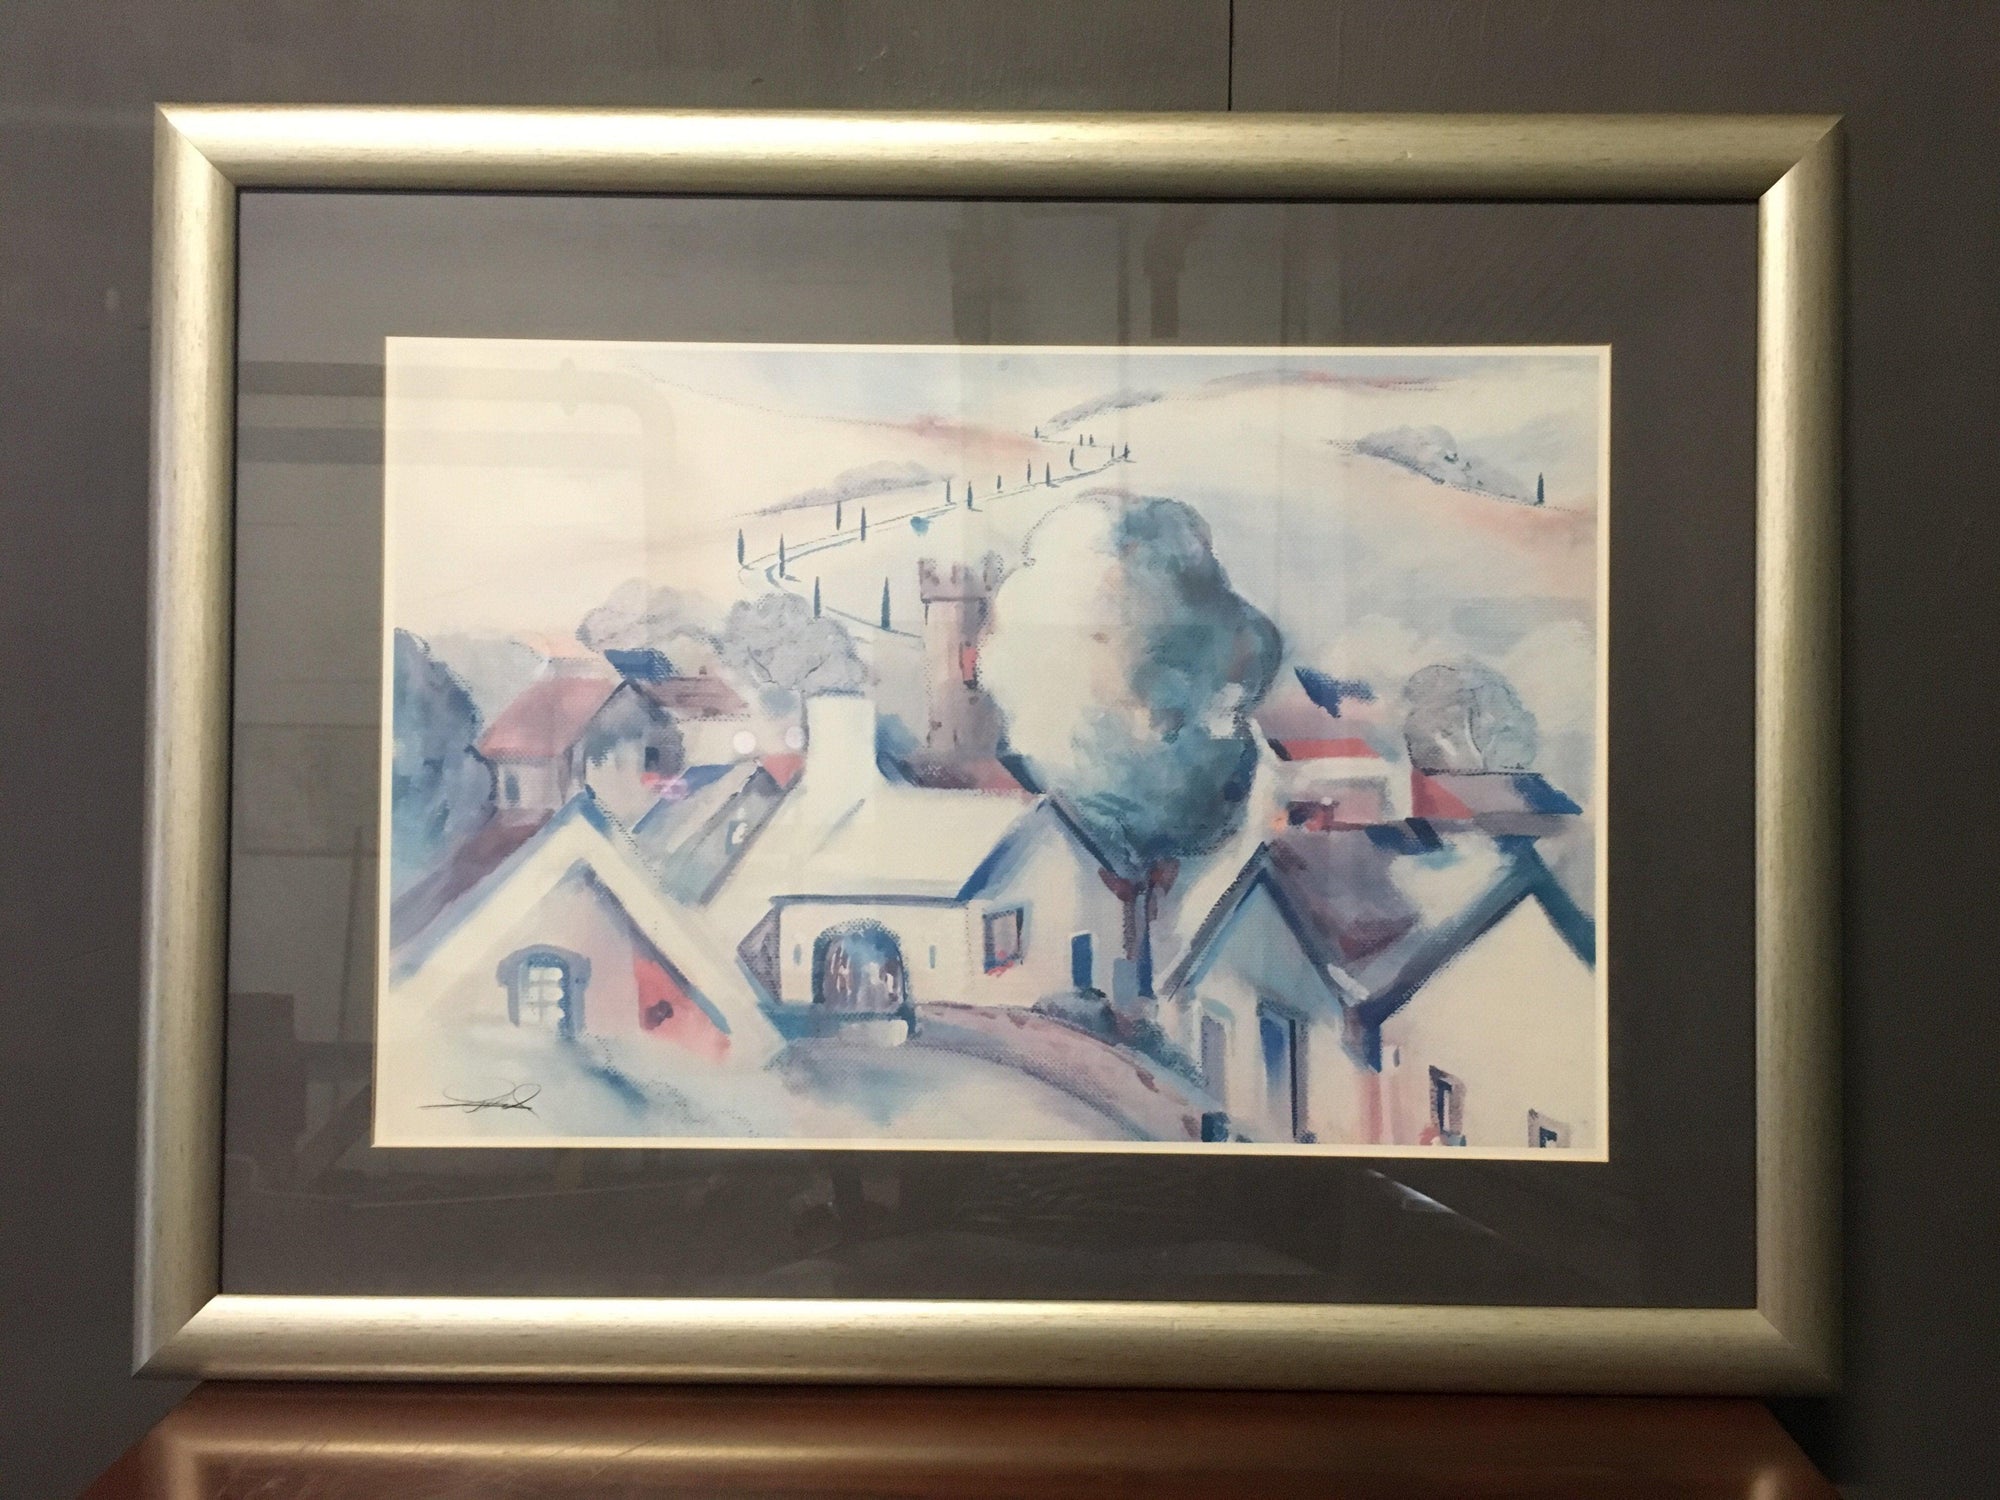 Houses On The Hill Framed Painting - 2ndhandwarehouse.com